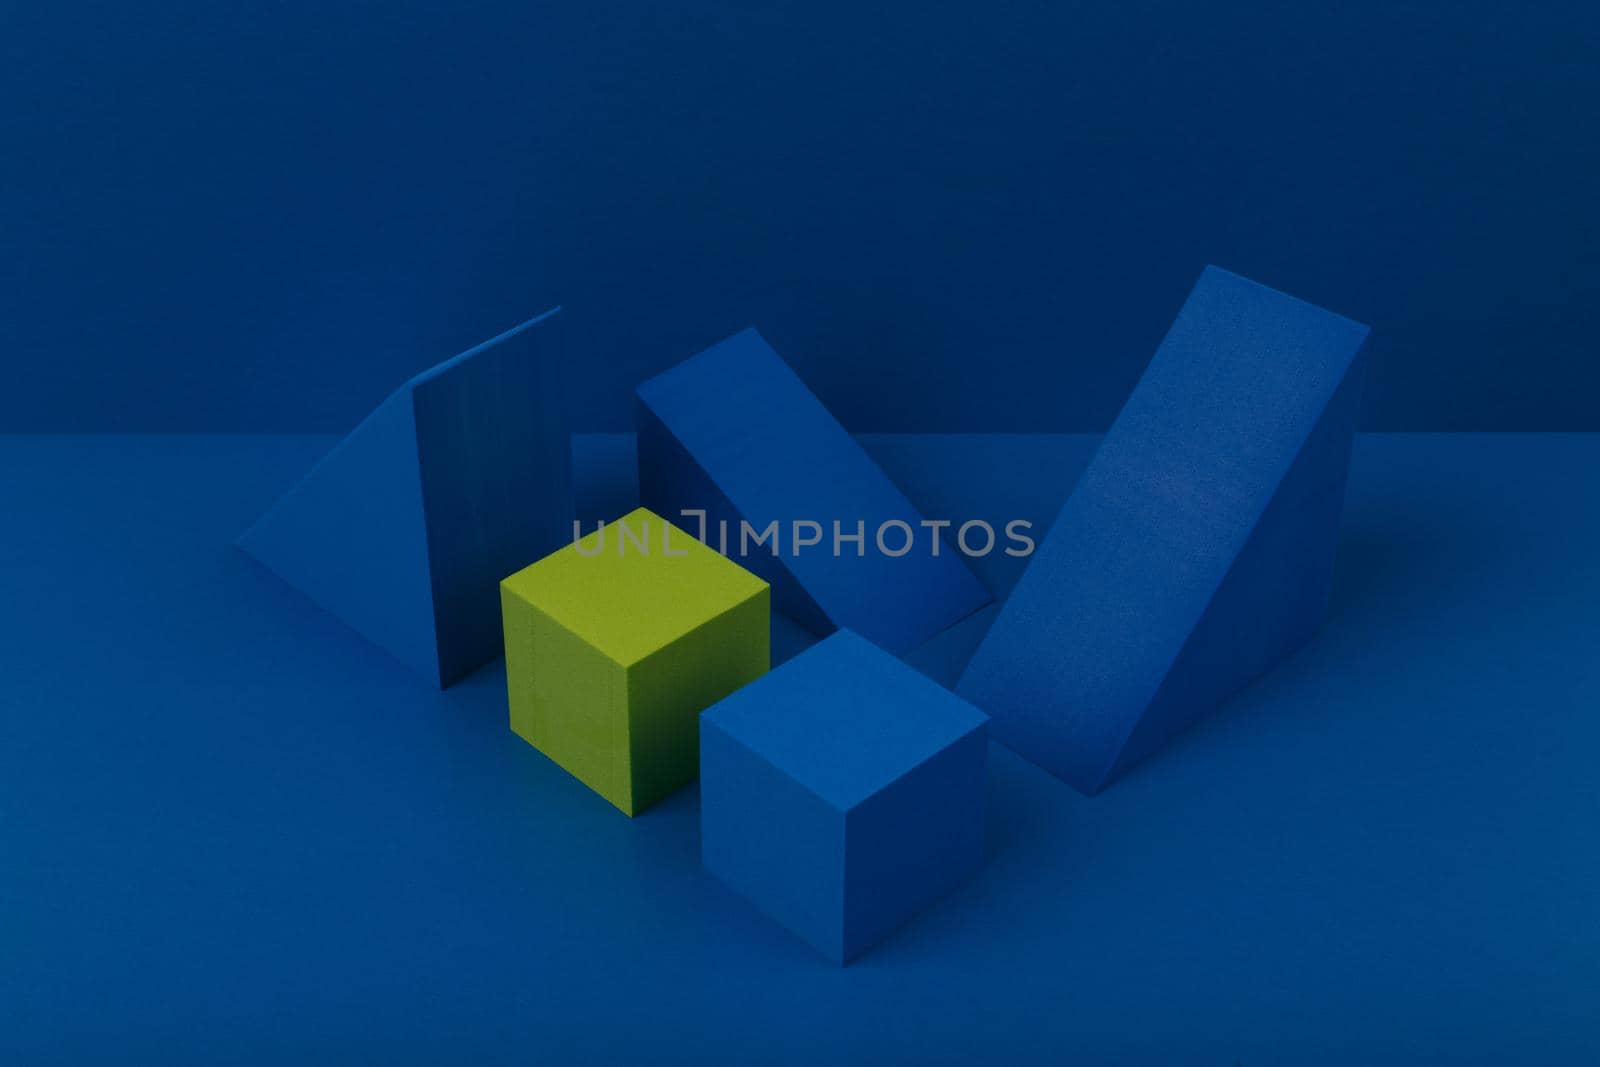 Still life with blue and green geometric figures, triangles and cubes on blue background. 